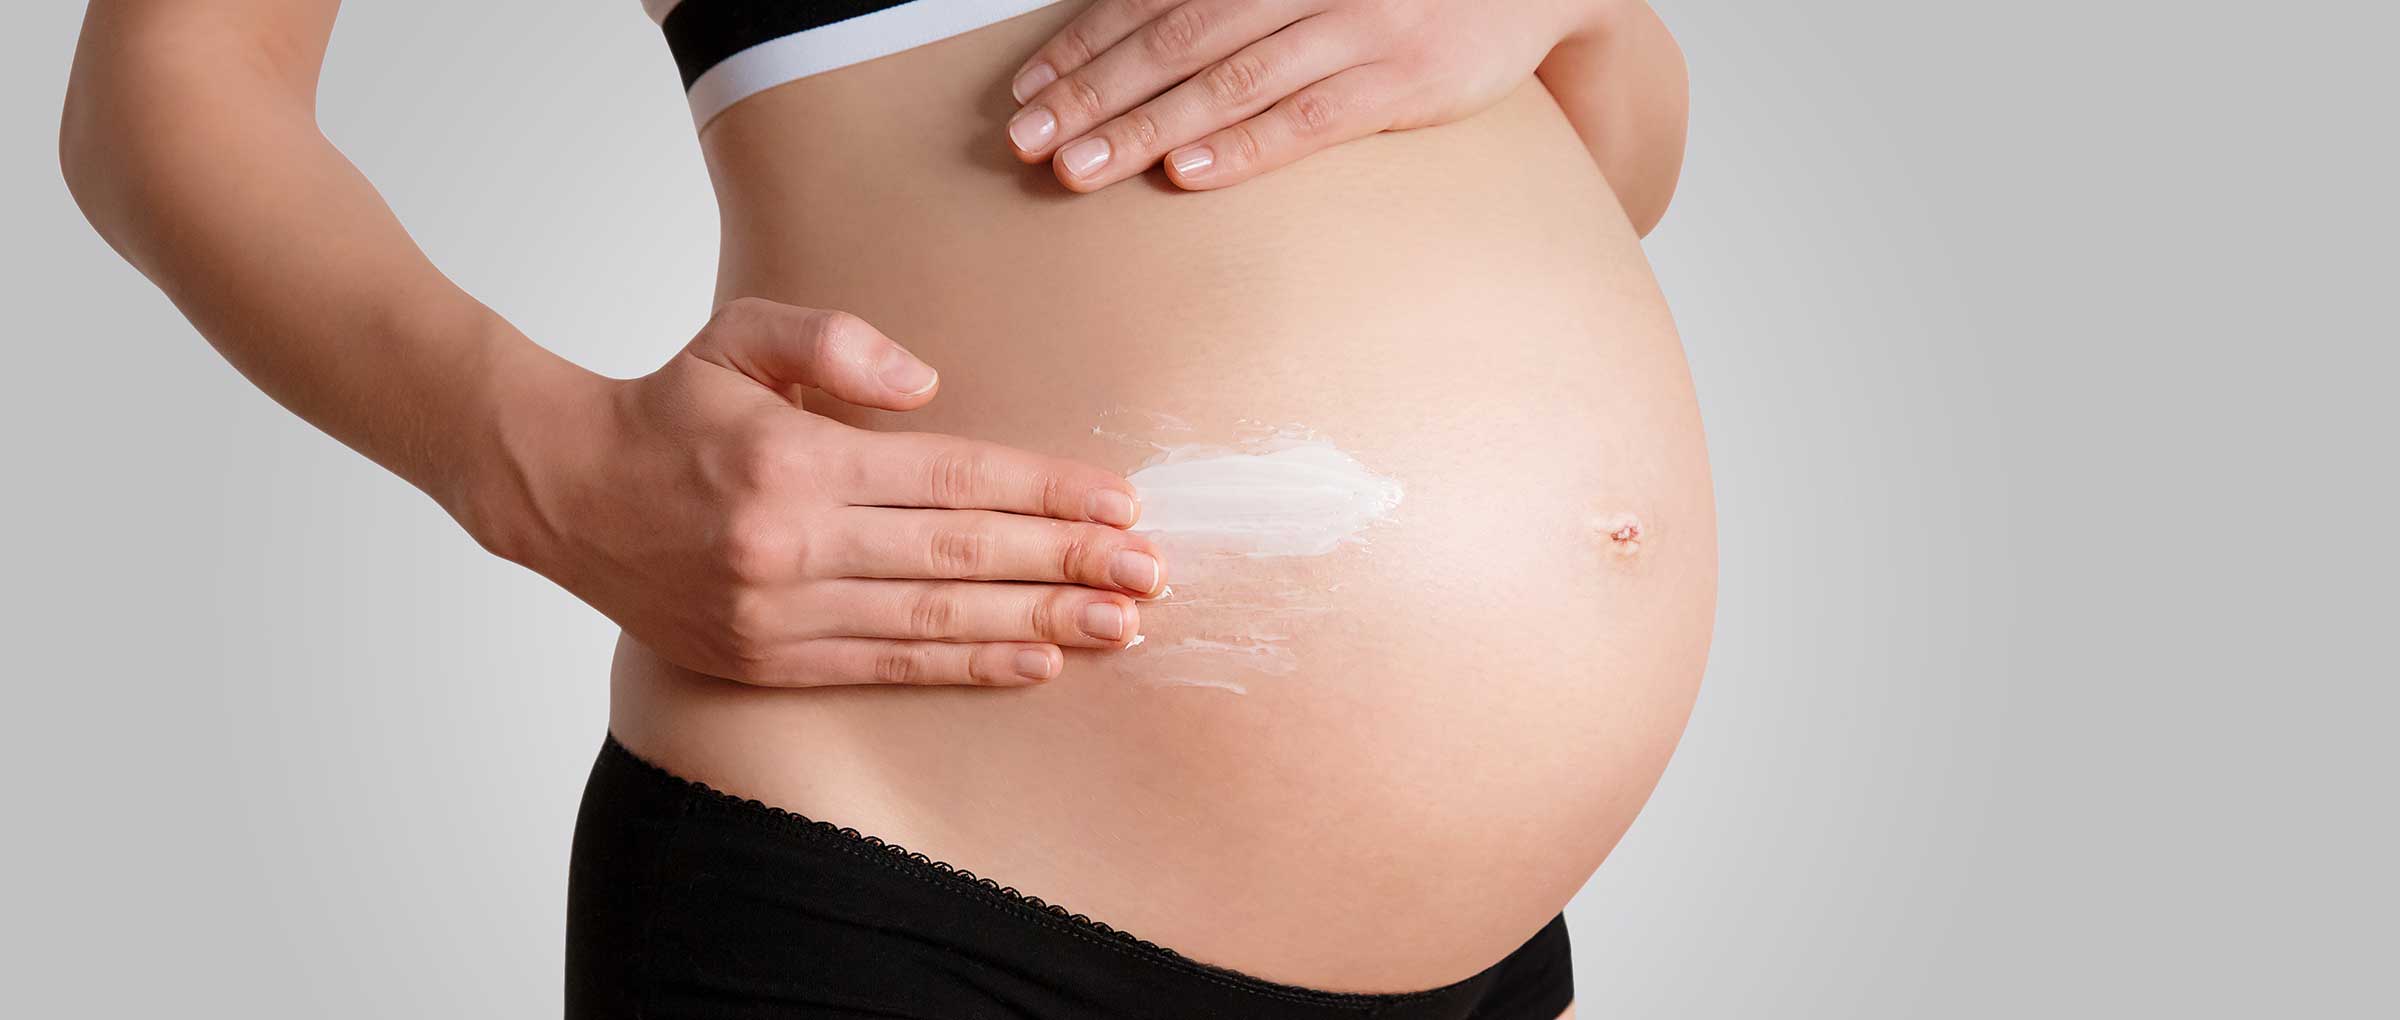 Your skin at week 22 of pregnancy